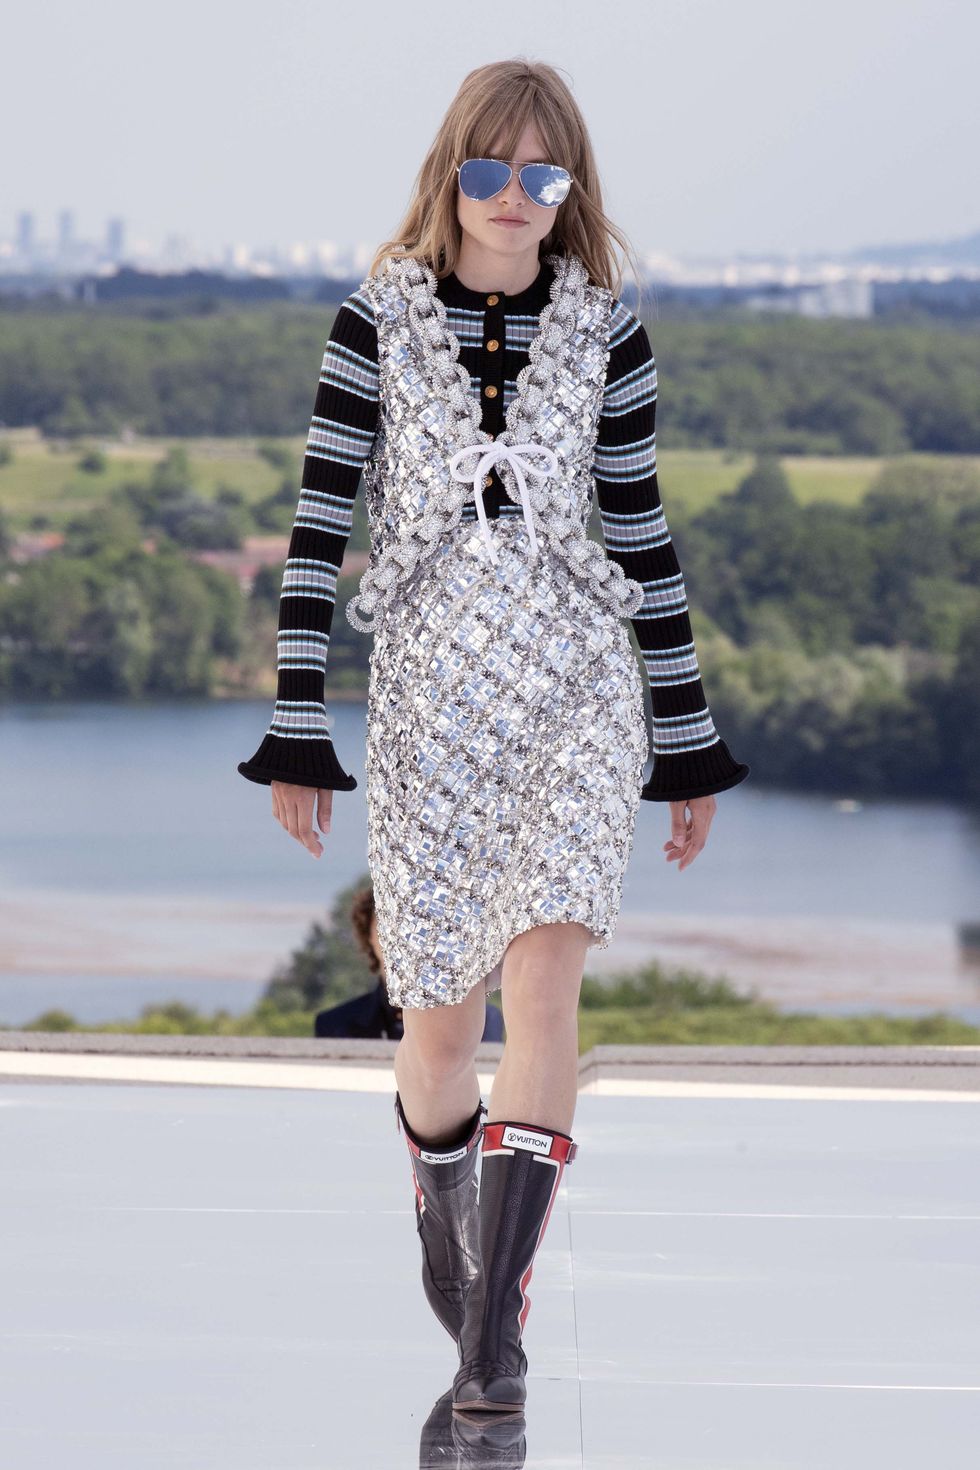 See Louis Vuitton's Ready-to-Wear Cruise 2022 Collection